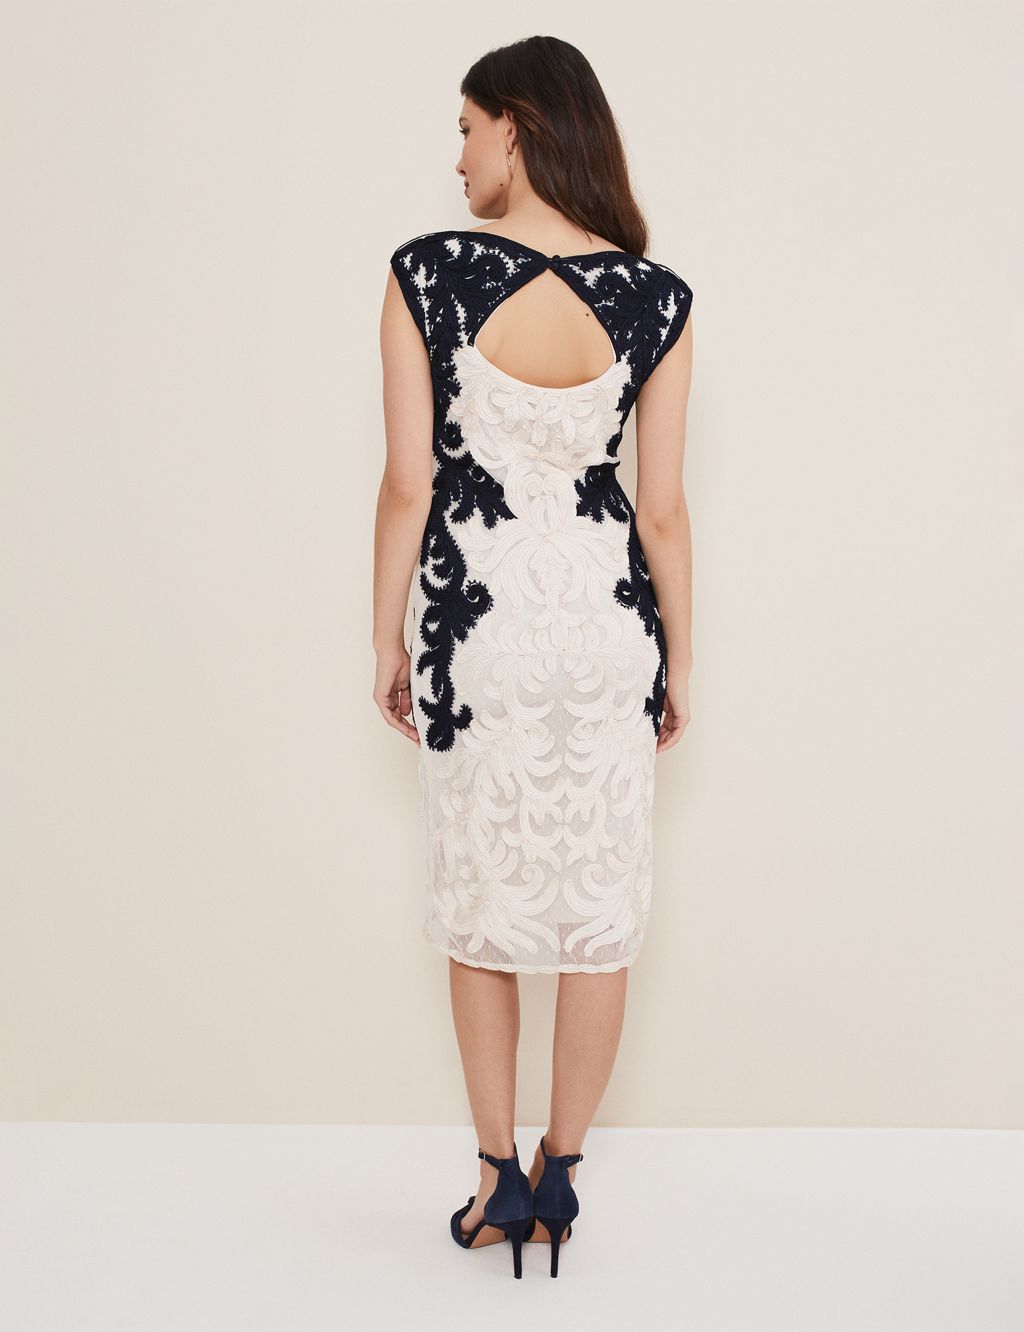 Embroidered Round Neck Tailored Dress image 5